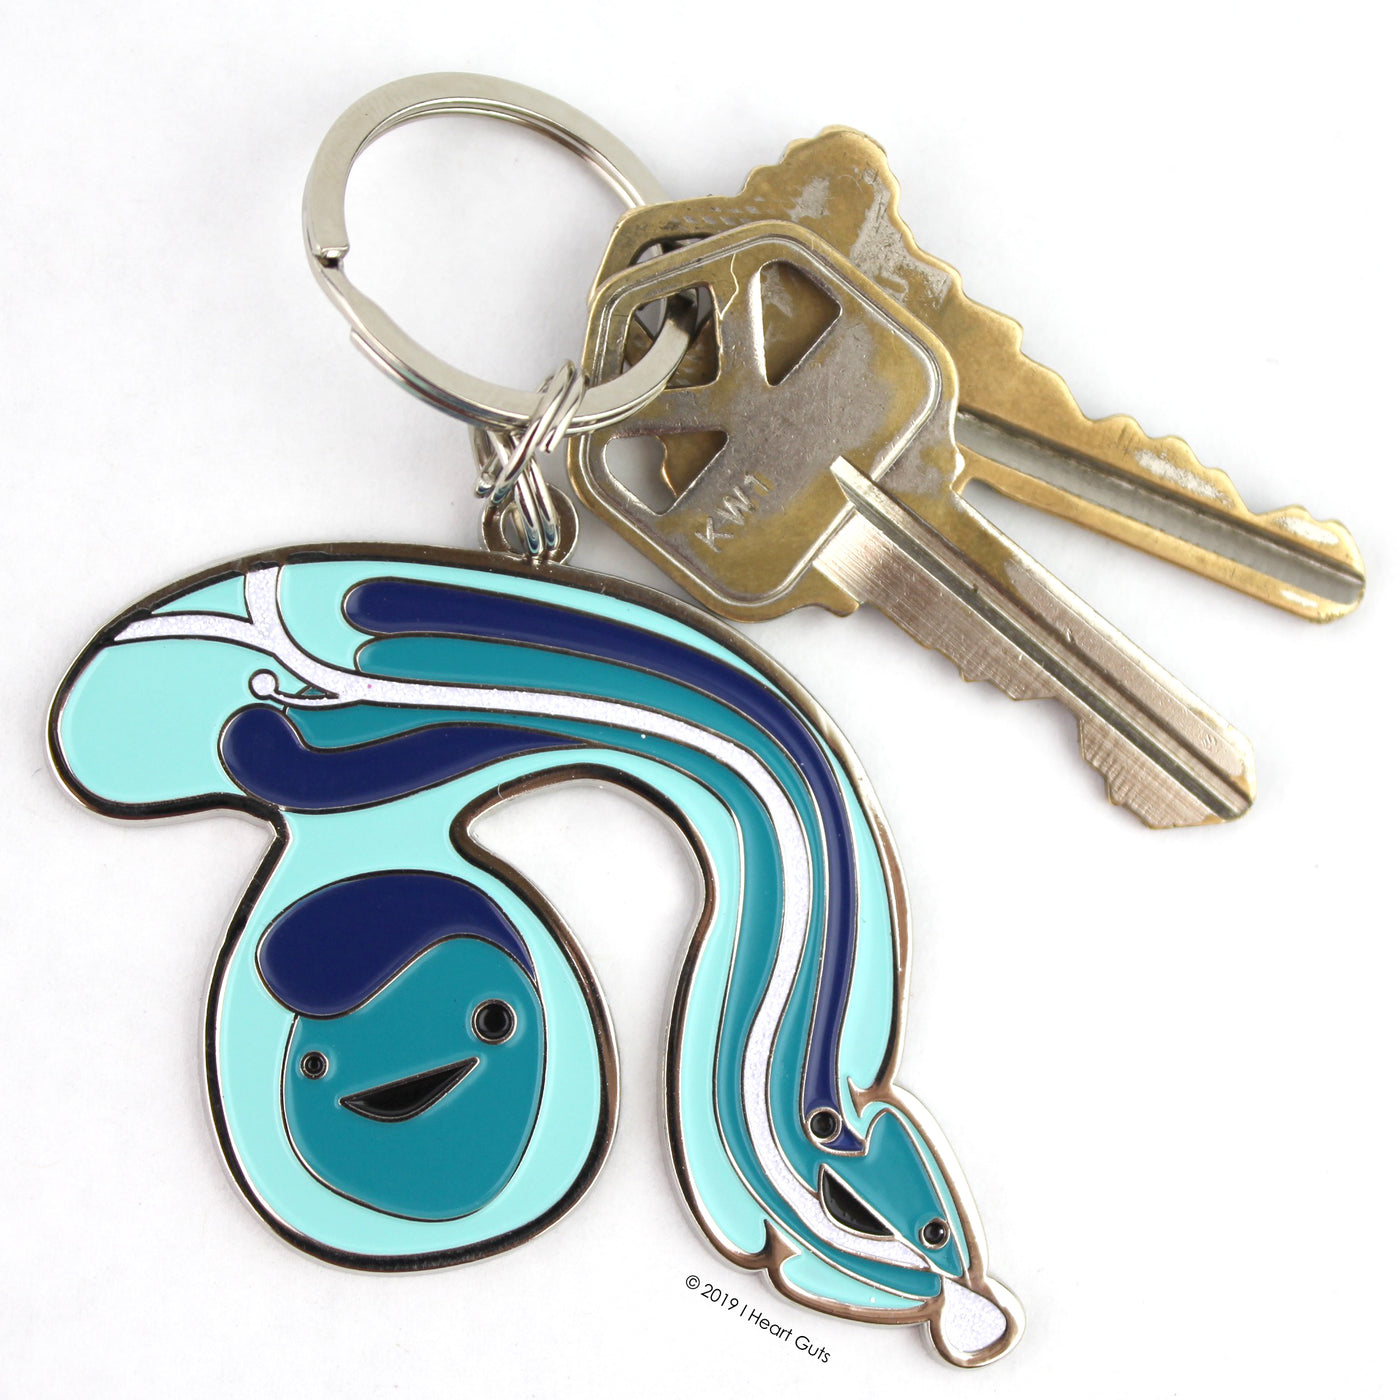 Blue Peen Keychain with Sparkly Anatomical Plumbing - I Heart Guts